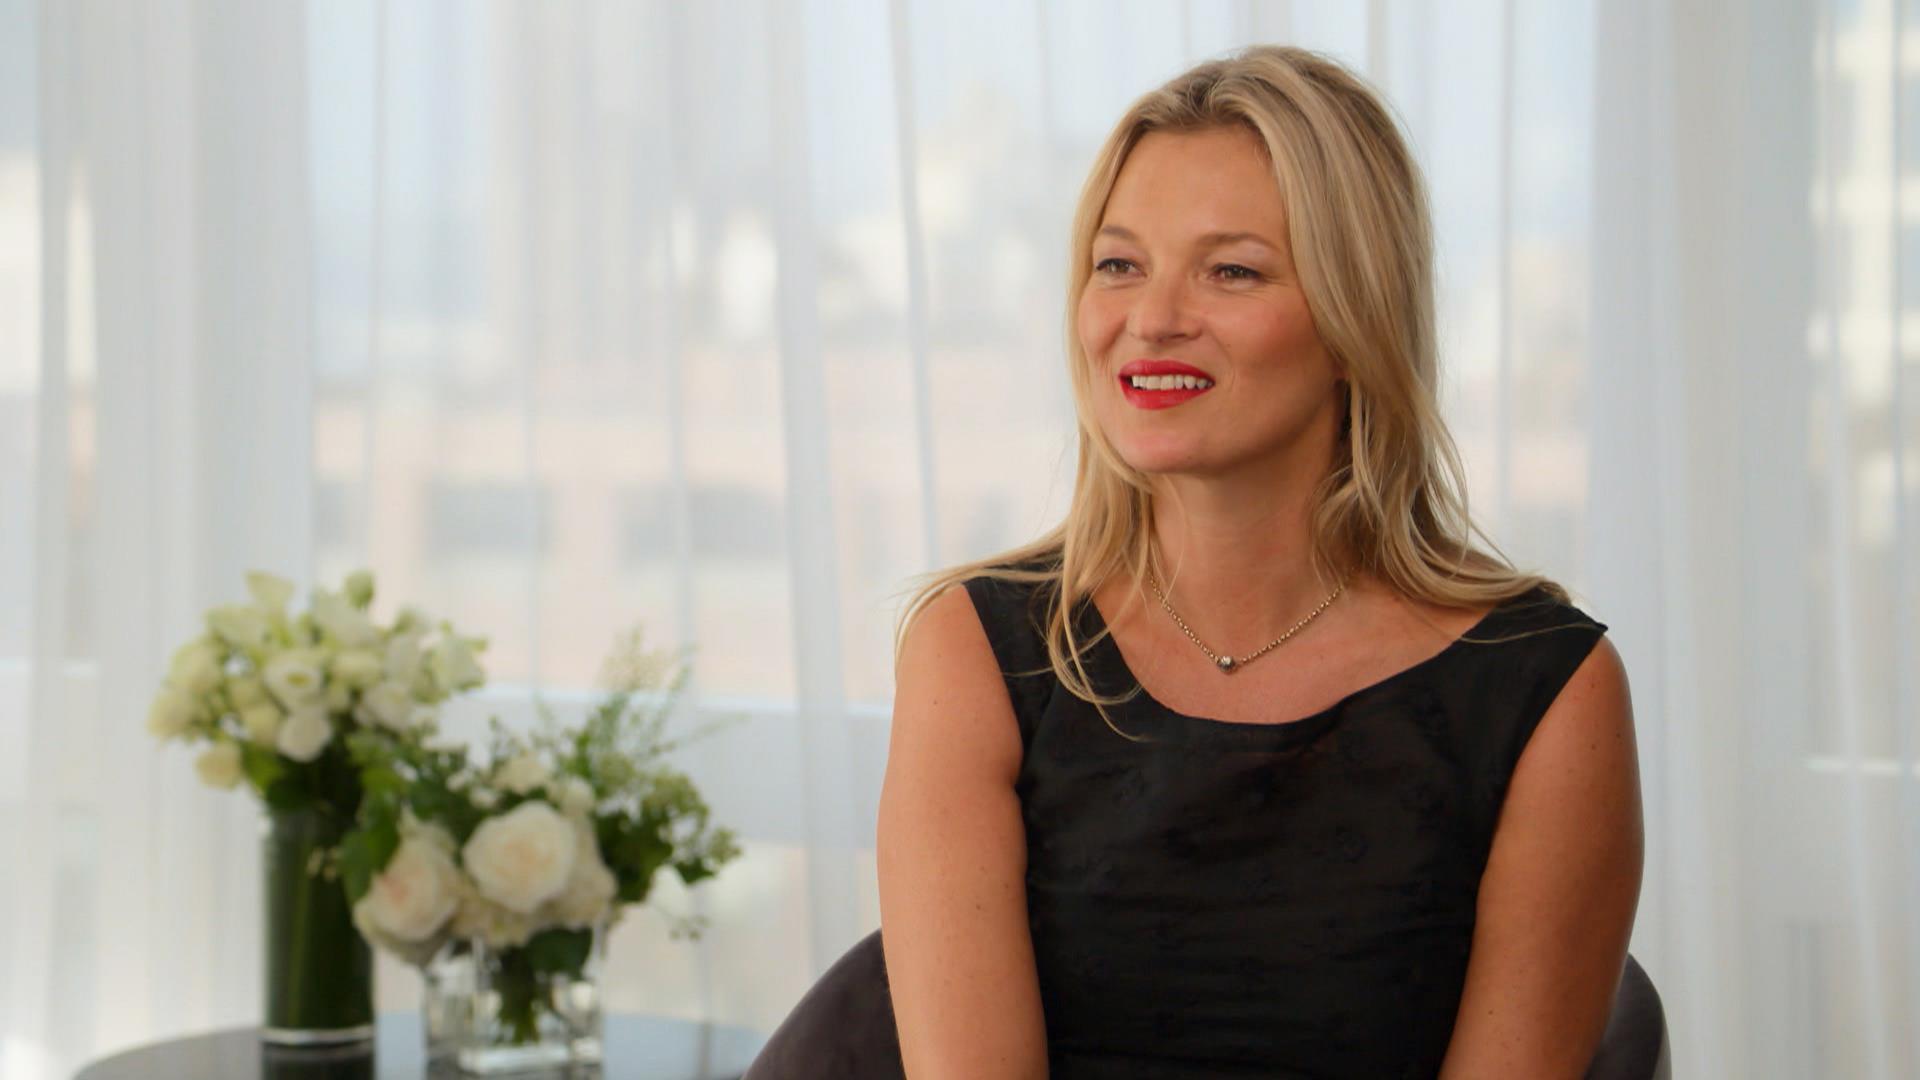 Kate Moss talks to Megyn Kelly about modeling and motherhood